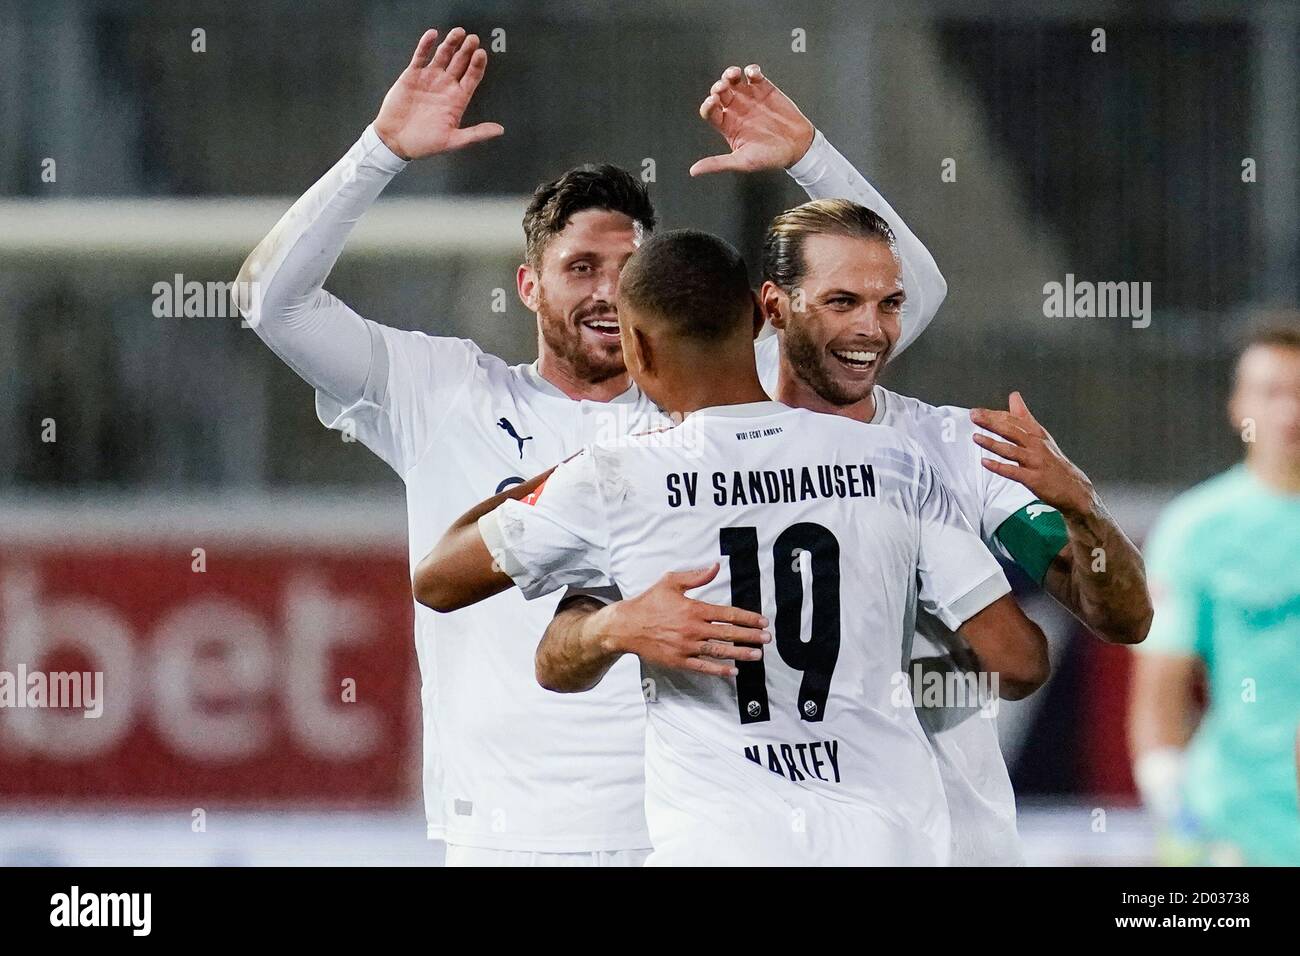 Sandhausen, Germany. 02nd Oct, 2020. Football: 2nd Bundesliga, SV Sandhausen - FC St. Pauli, 3rd matchday, Hardtwaldstadion. Sandhausen's Dennis Diekmeier (r) cheers for victory with his teammates. Credit: Uwe Anspach/dpa - IMPORTANT NOTE: In accordance with the regulations of the DFL Deutsche Fußball Liga and the DFB Deutscher Fußball-Bund, it is prohibited to exploit or have exploited in the stadium and/or from the game taken photographs in the form of sequence images and/or video-like photo series./dpa/Alamy Live News Stock Photo